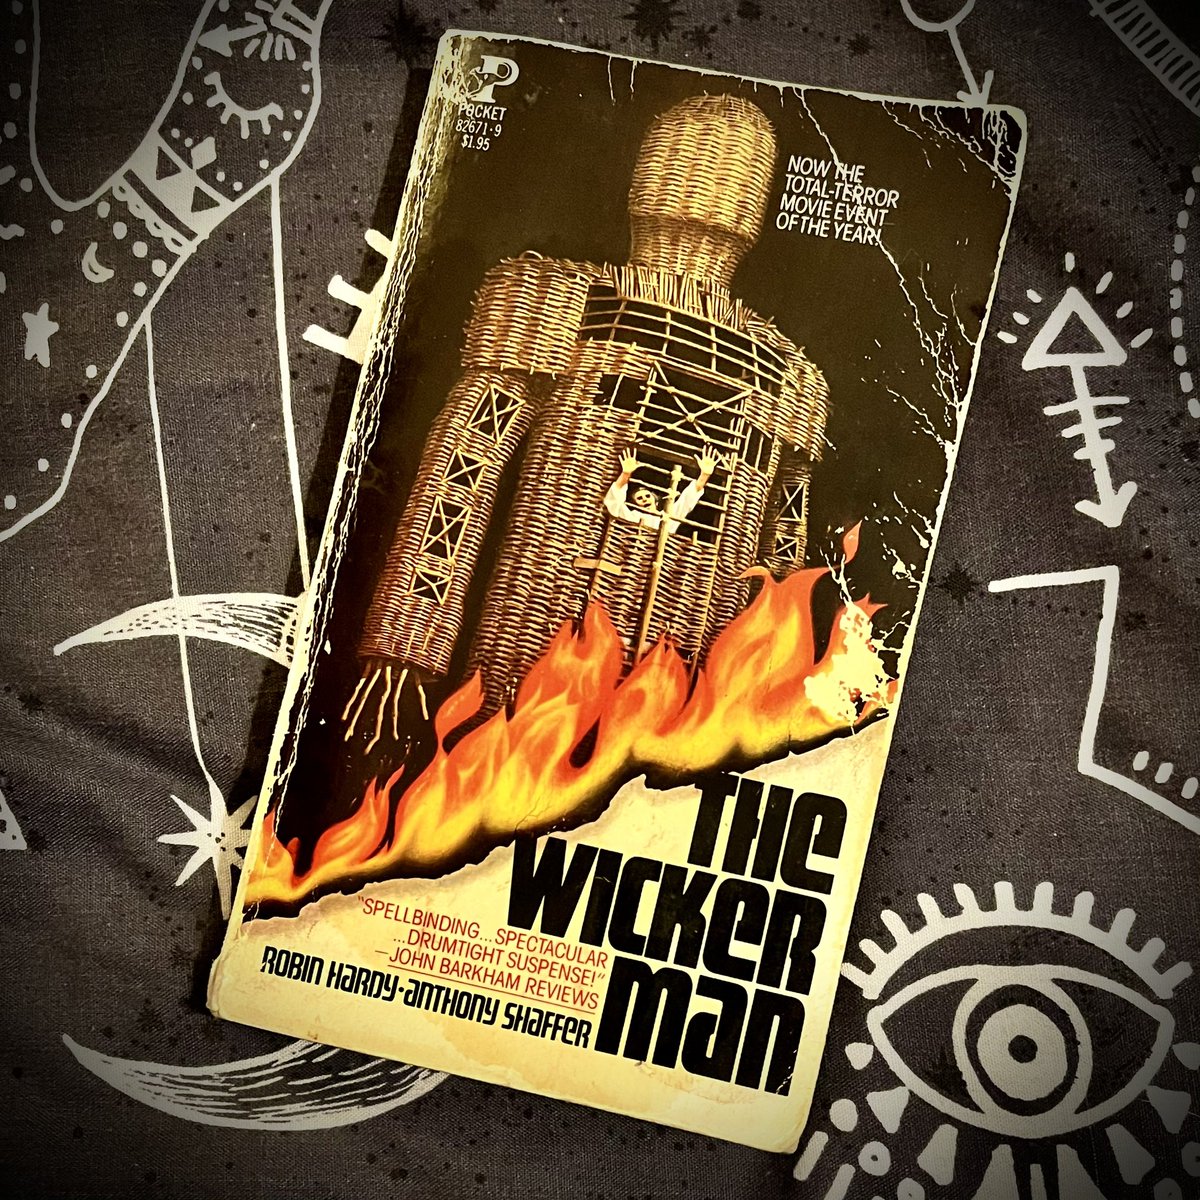 Next up in the series I like to call ‘tattered old horror paperbacks I’m enjoying’… #TheWickerMan!

A novelisation of #AnthonyShaffer’s script written by #RobinHardy, published in 1978.